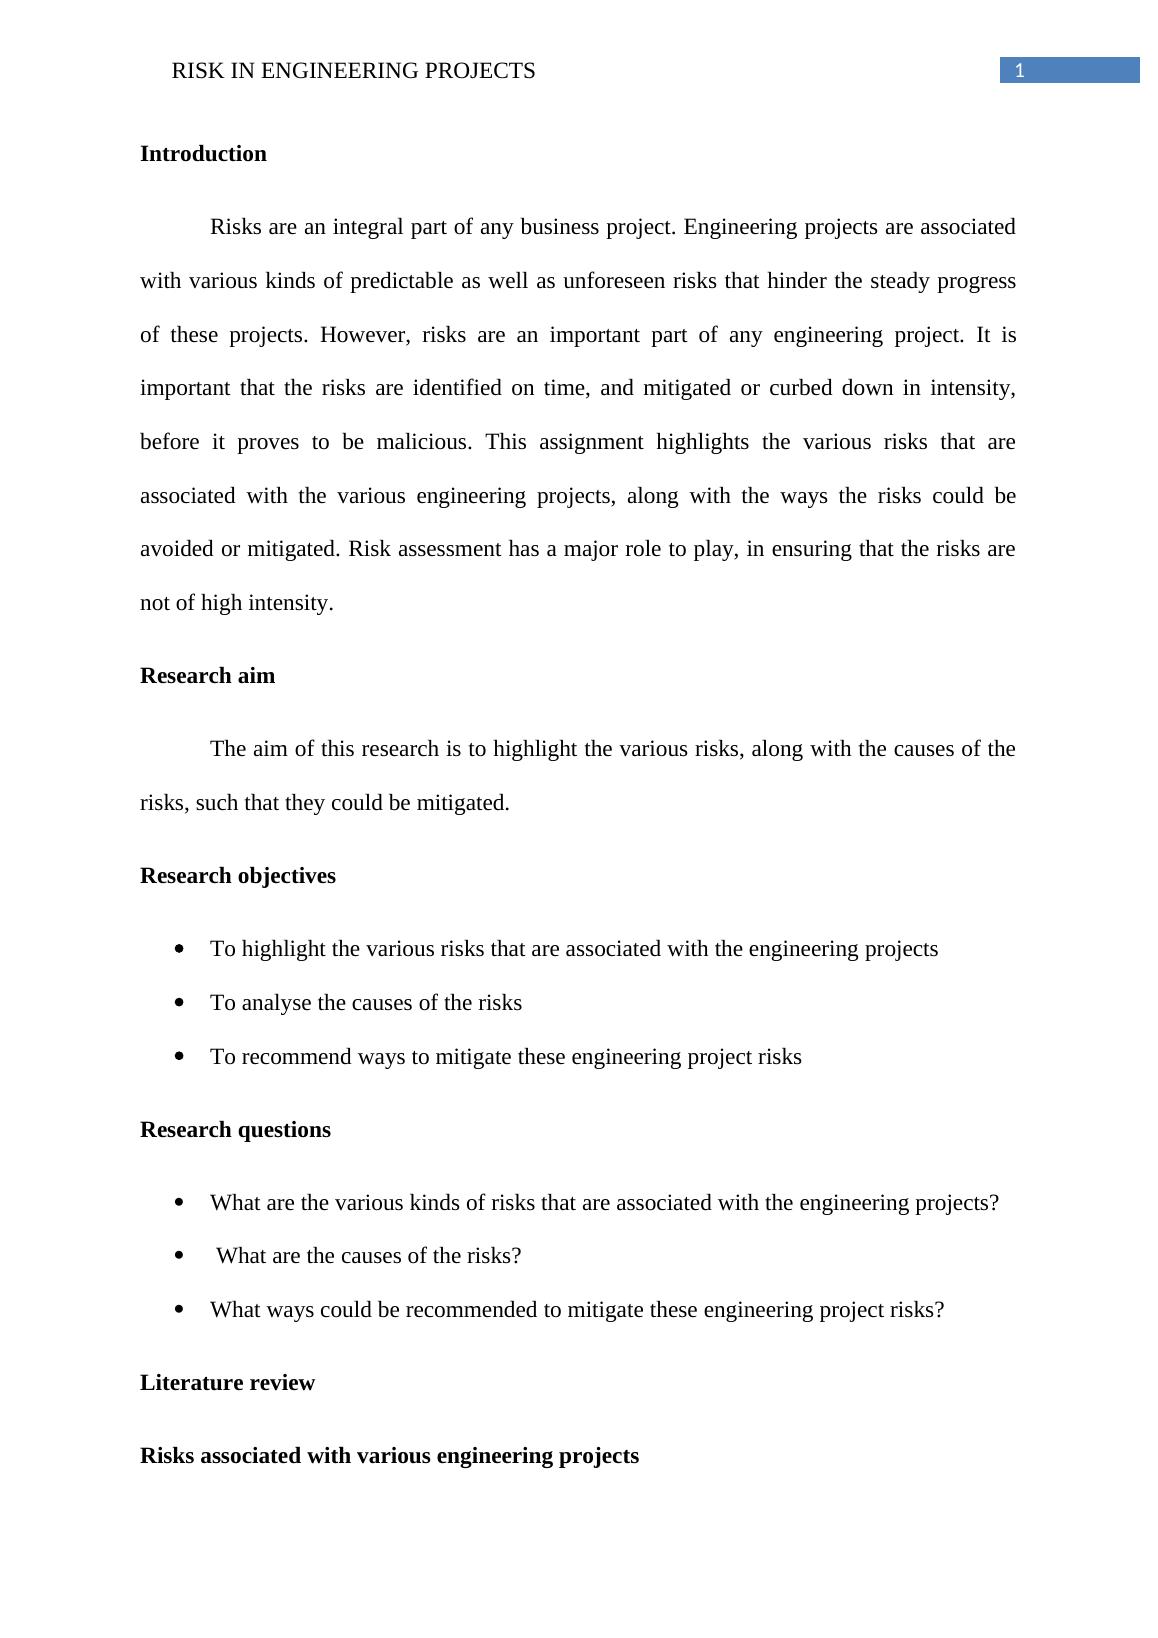 MGMT6019 - Risk in Engineering Projects Assignment_2